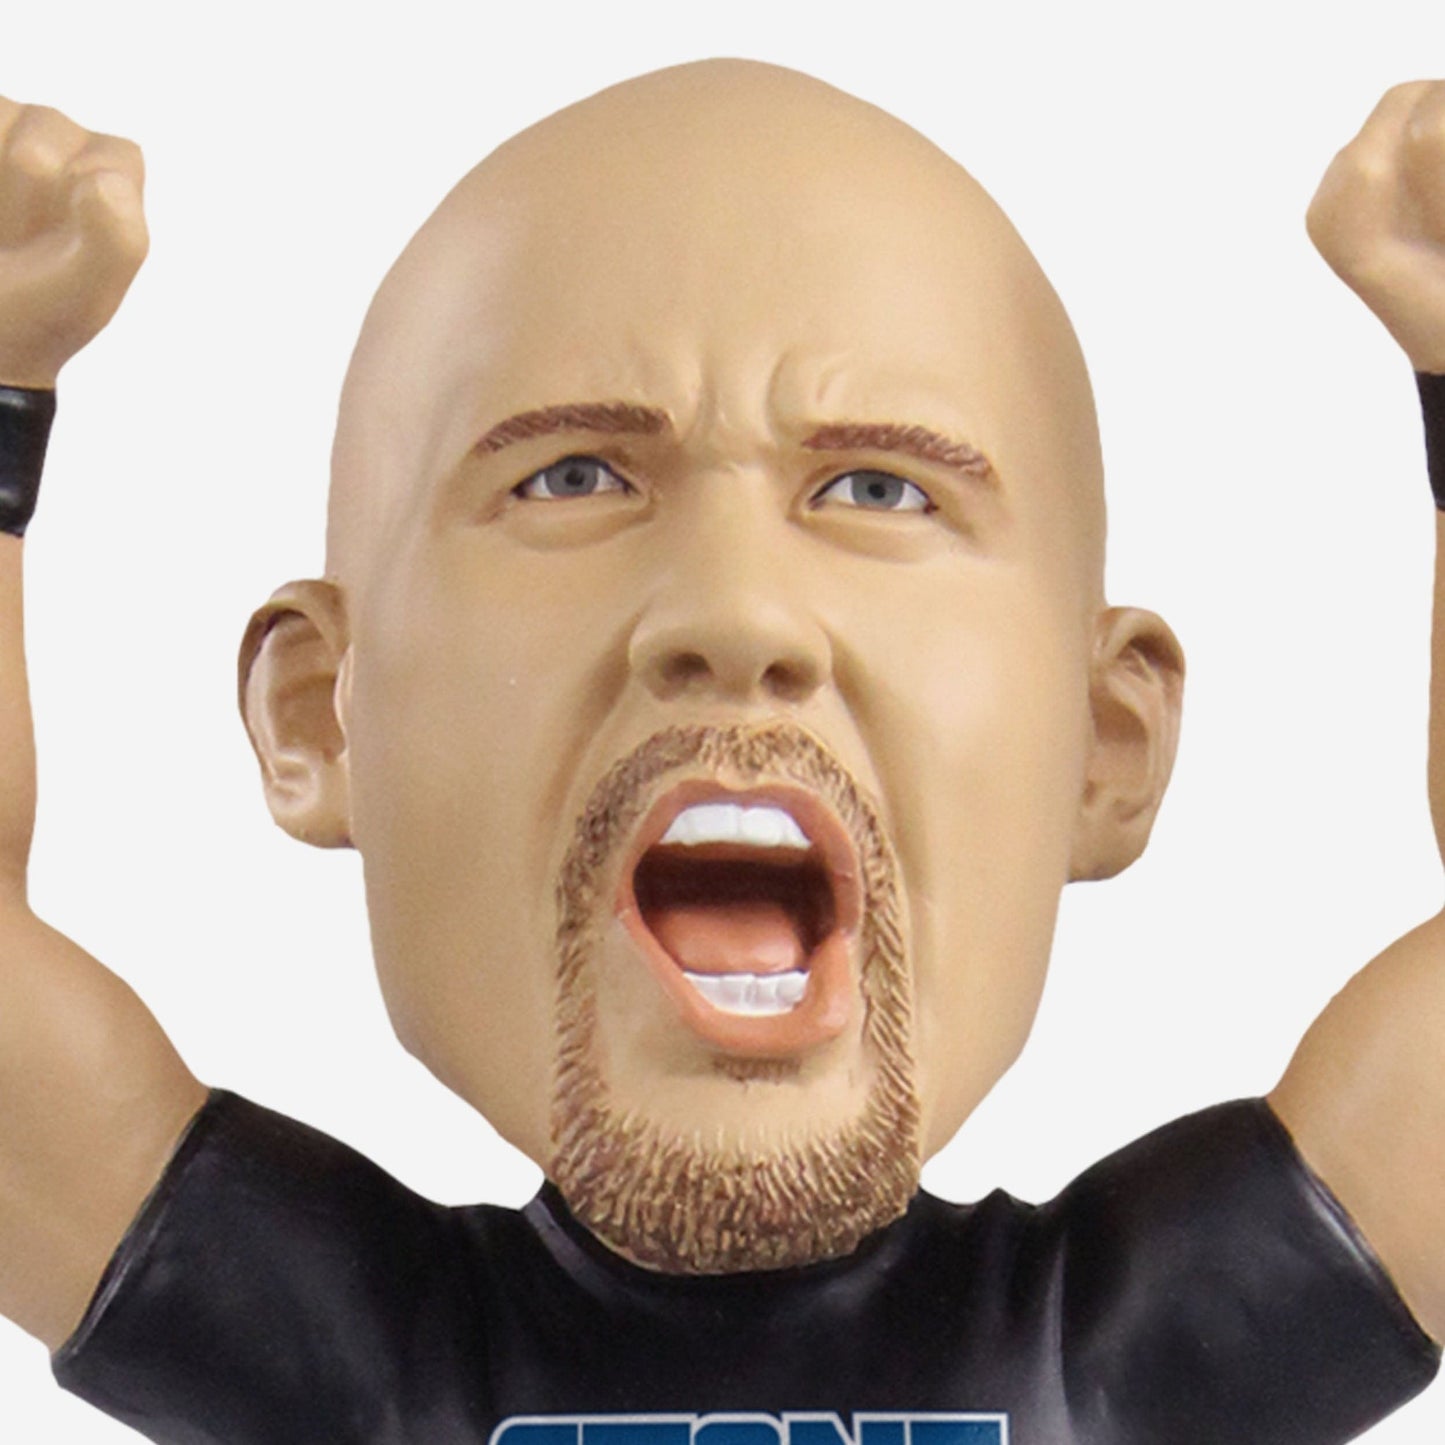 2023 WWE FOCO Bobbleheads Limited Edition Stone Cold Steve Austin